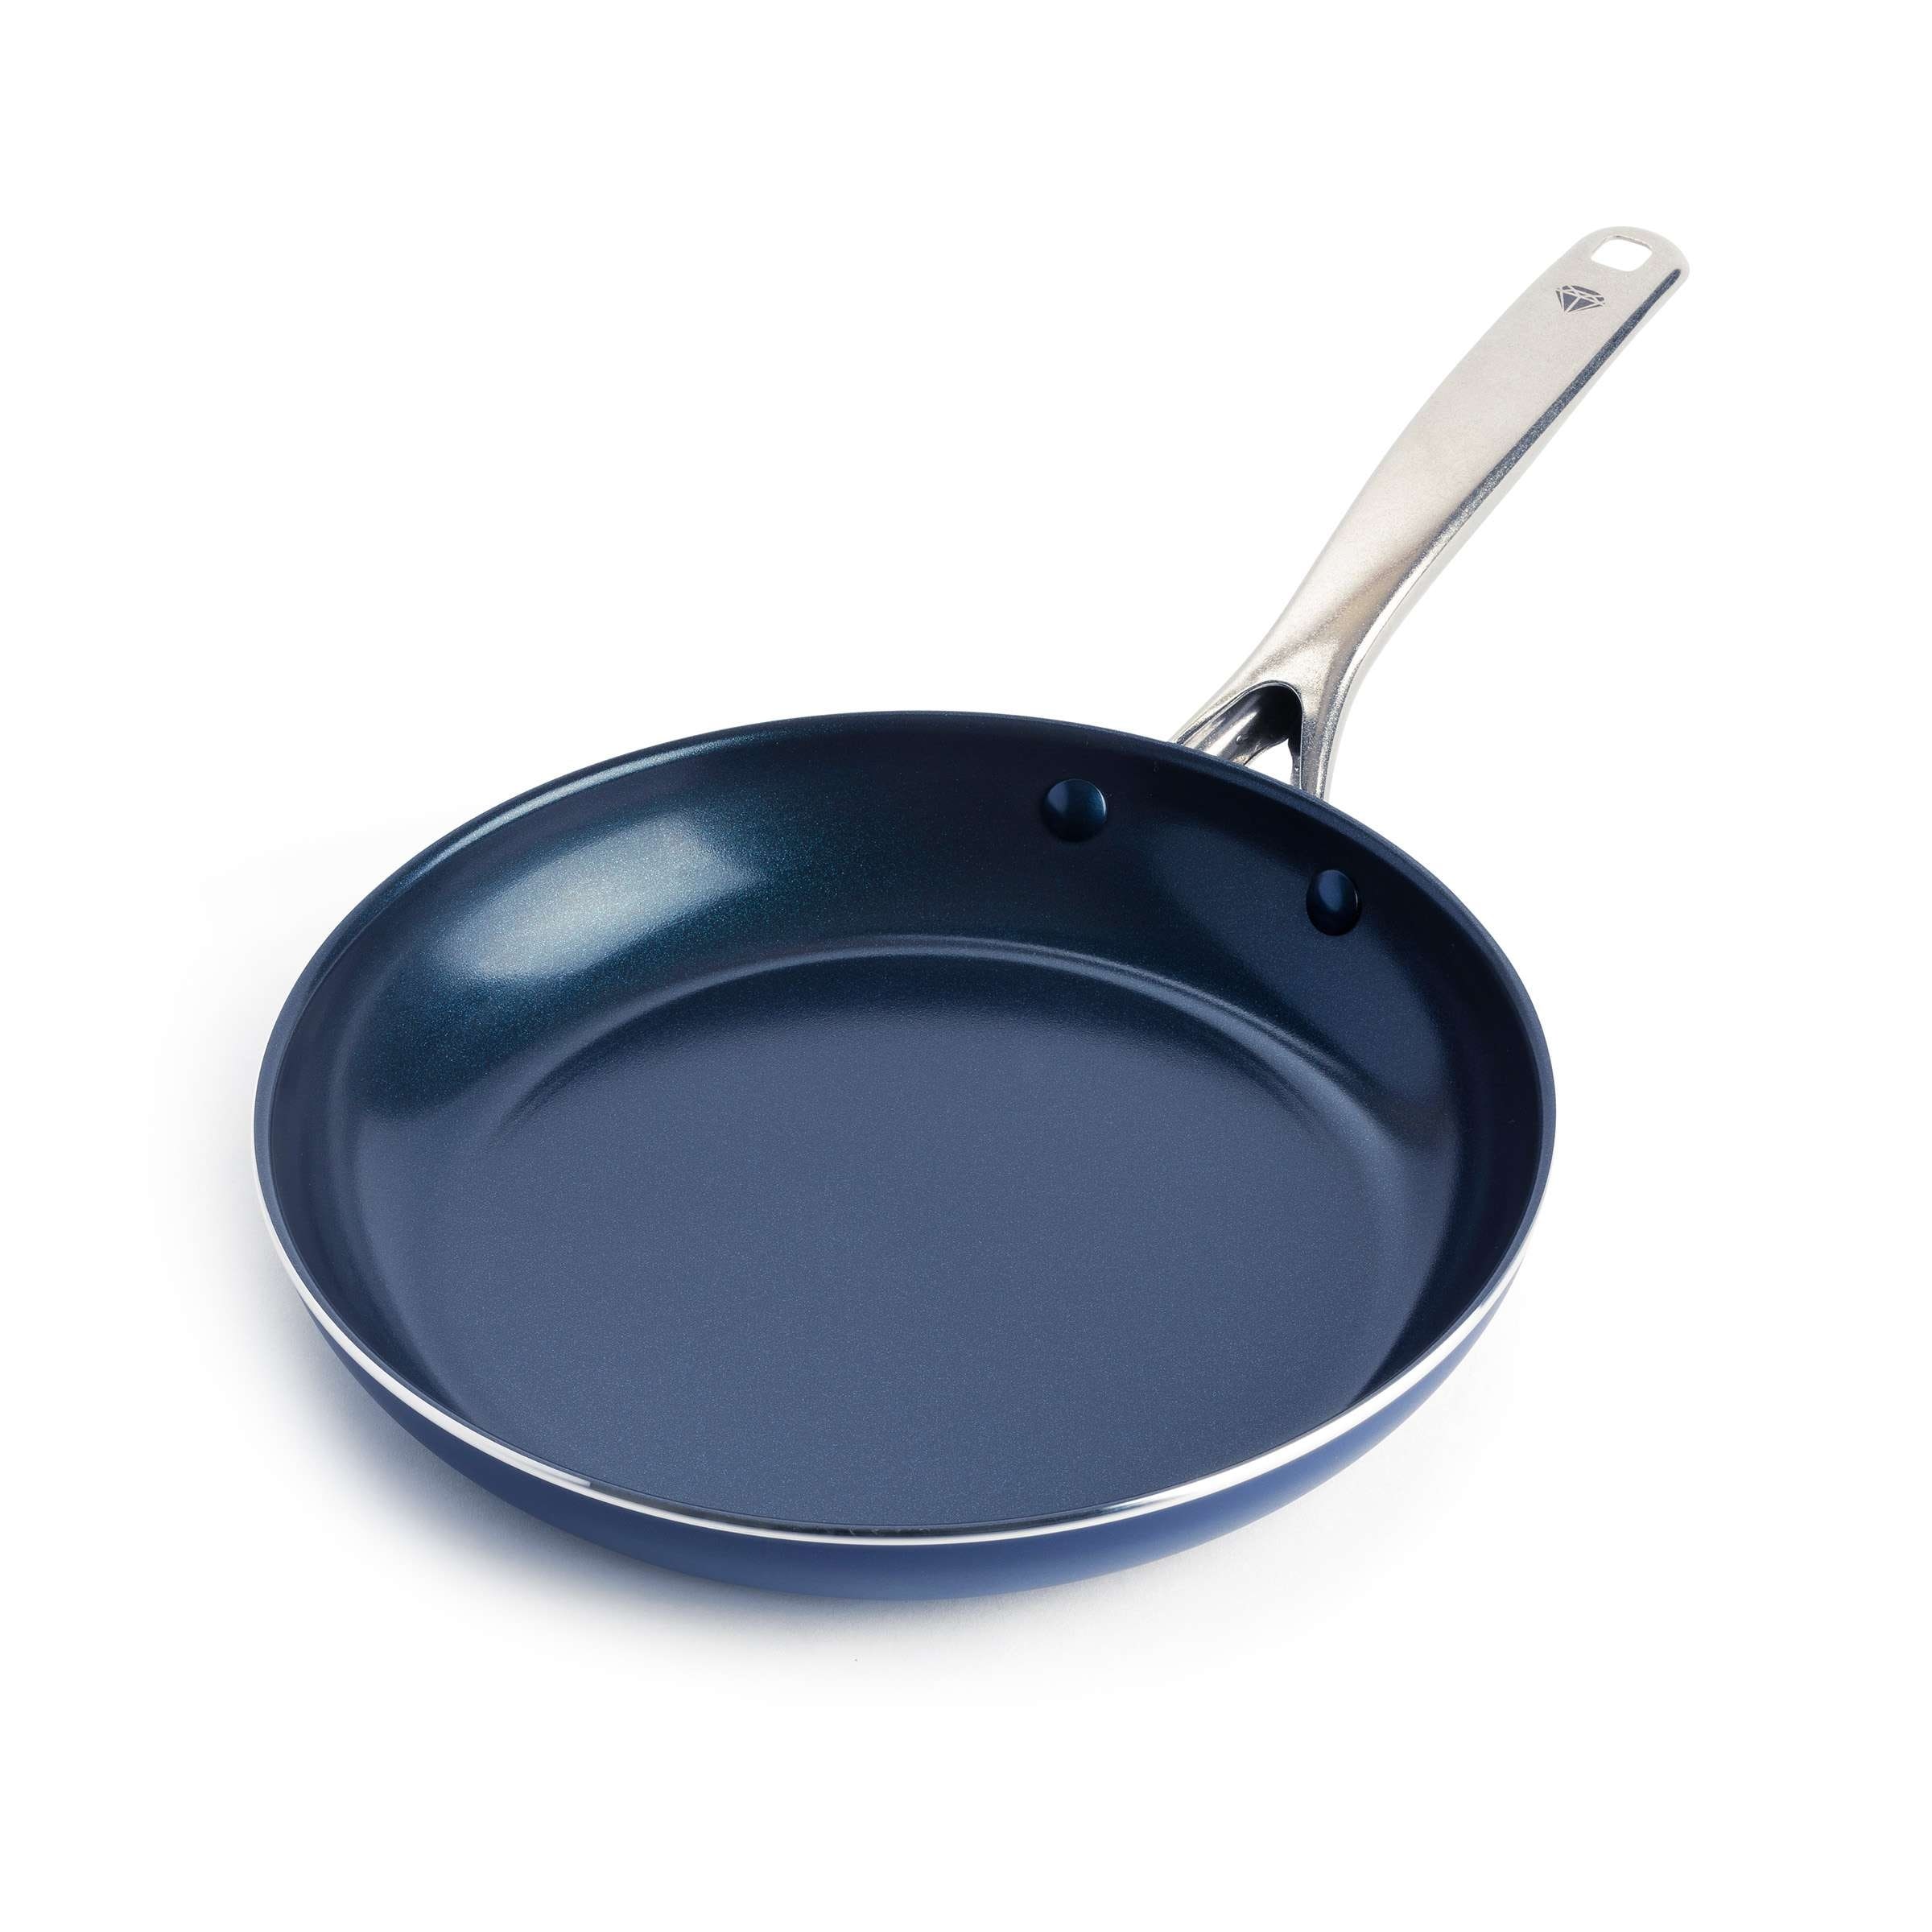 https://ak1.ostkcdn.com/images/products/is/images/direct/3f7fdb4f423374f59936df4c8c696bc4dffc1782/Blue-Diamond-Toxin-Free-Ceramic-Non-Stick-Open-Frying-Pan.jpg